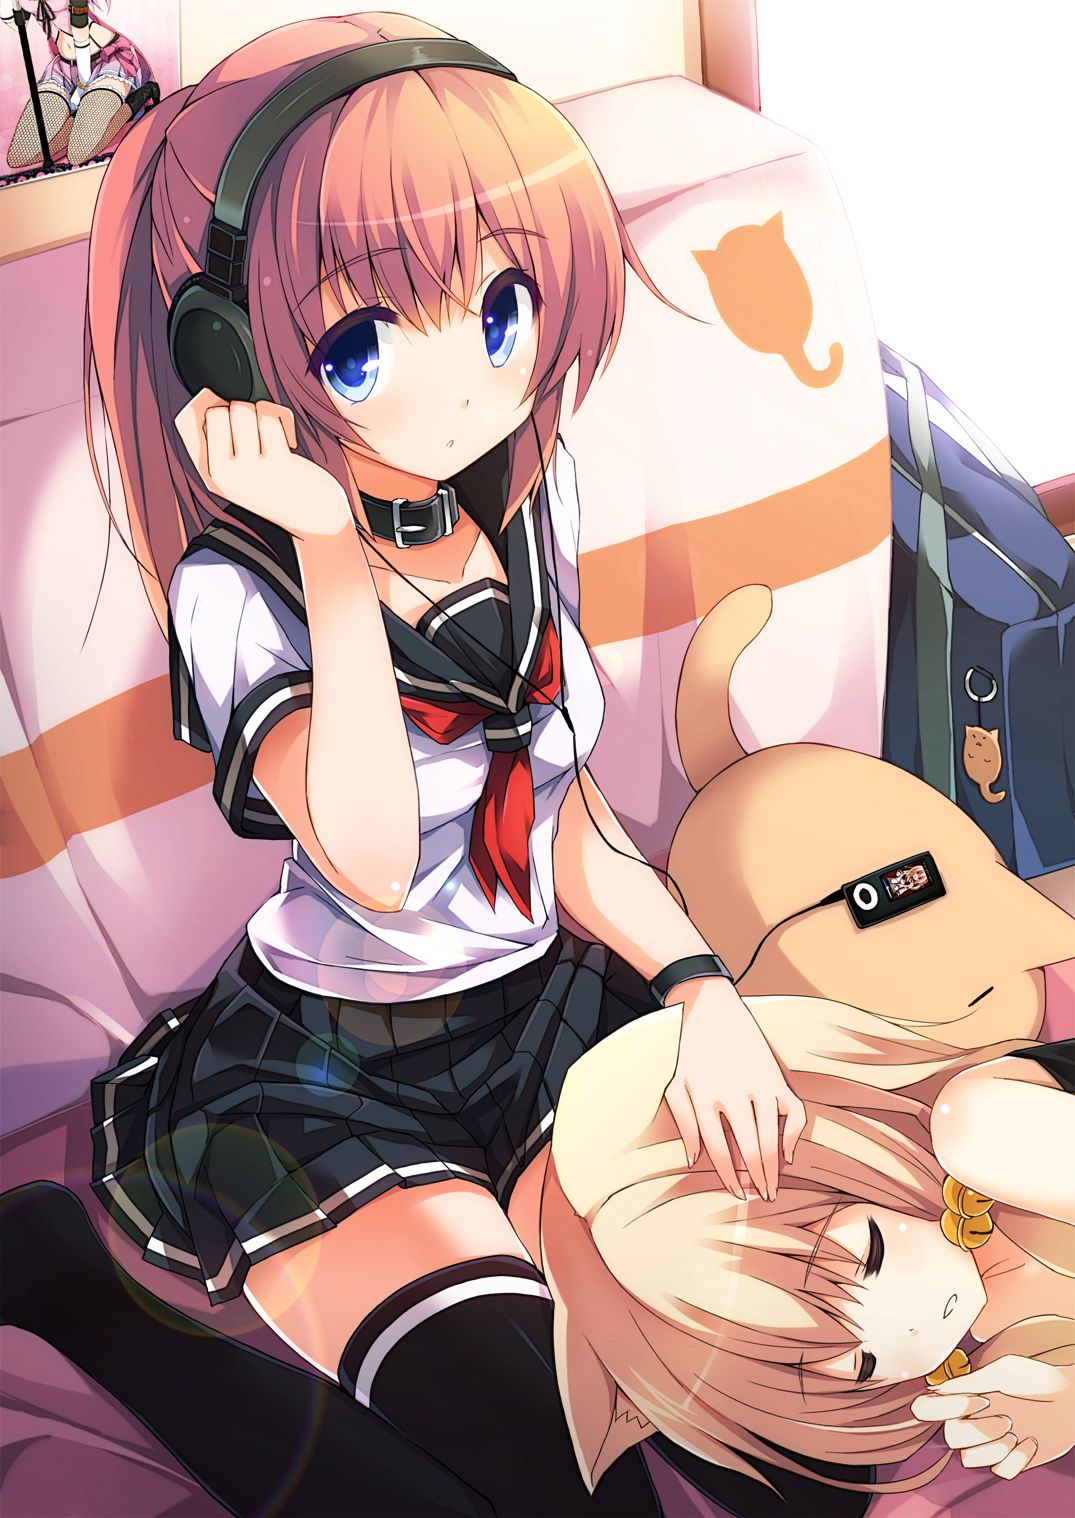 [Secondary] headphones x girl cute picture! 3